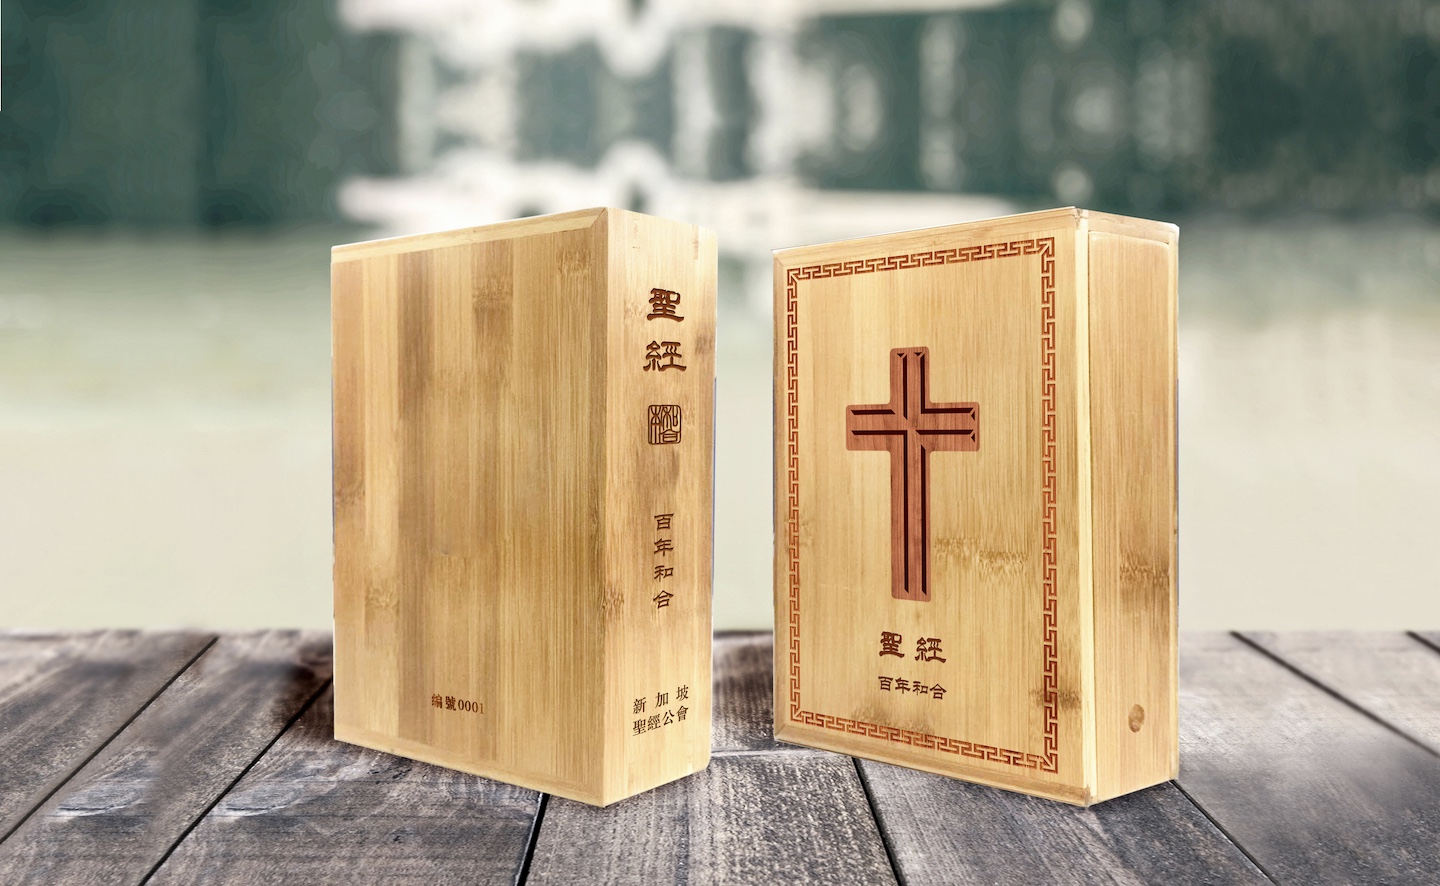 In celebration of the 100th anniversary of the publication of the Chinese Union Version (CUV) Bible, The Bible Society of Singapore has produced a Special Edition CUV Bible – a replica of the original CUV Bible texts that were first published in 1919. Photo courtesy of The Bible Society of Singapore